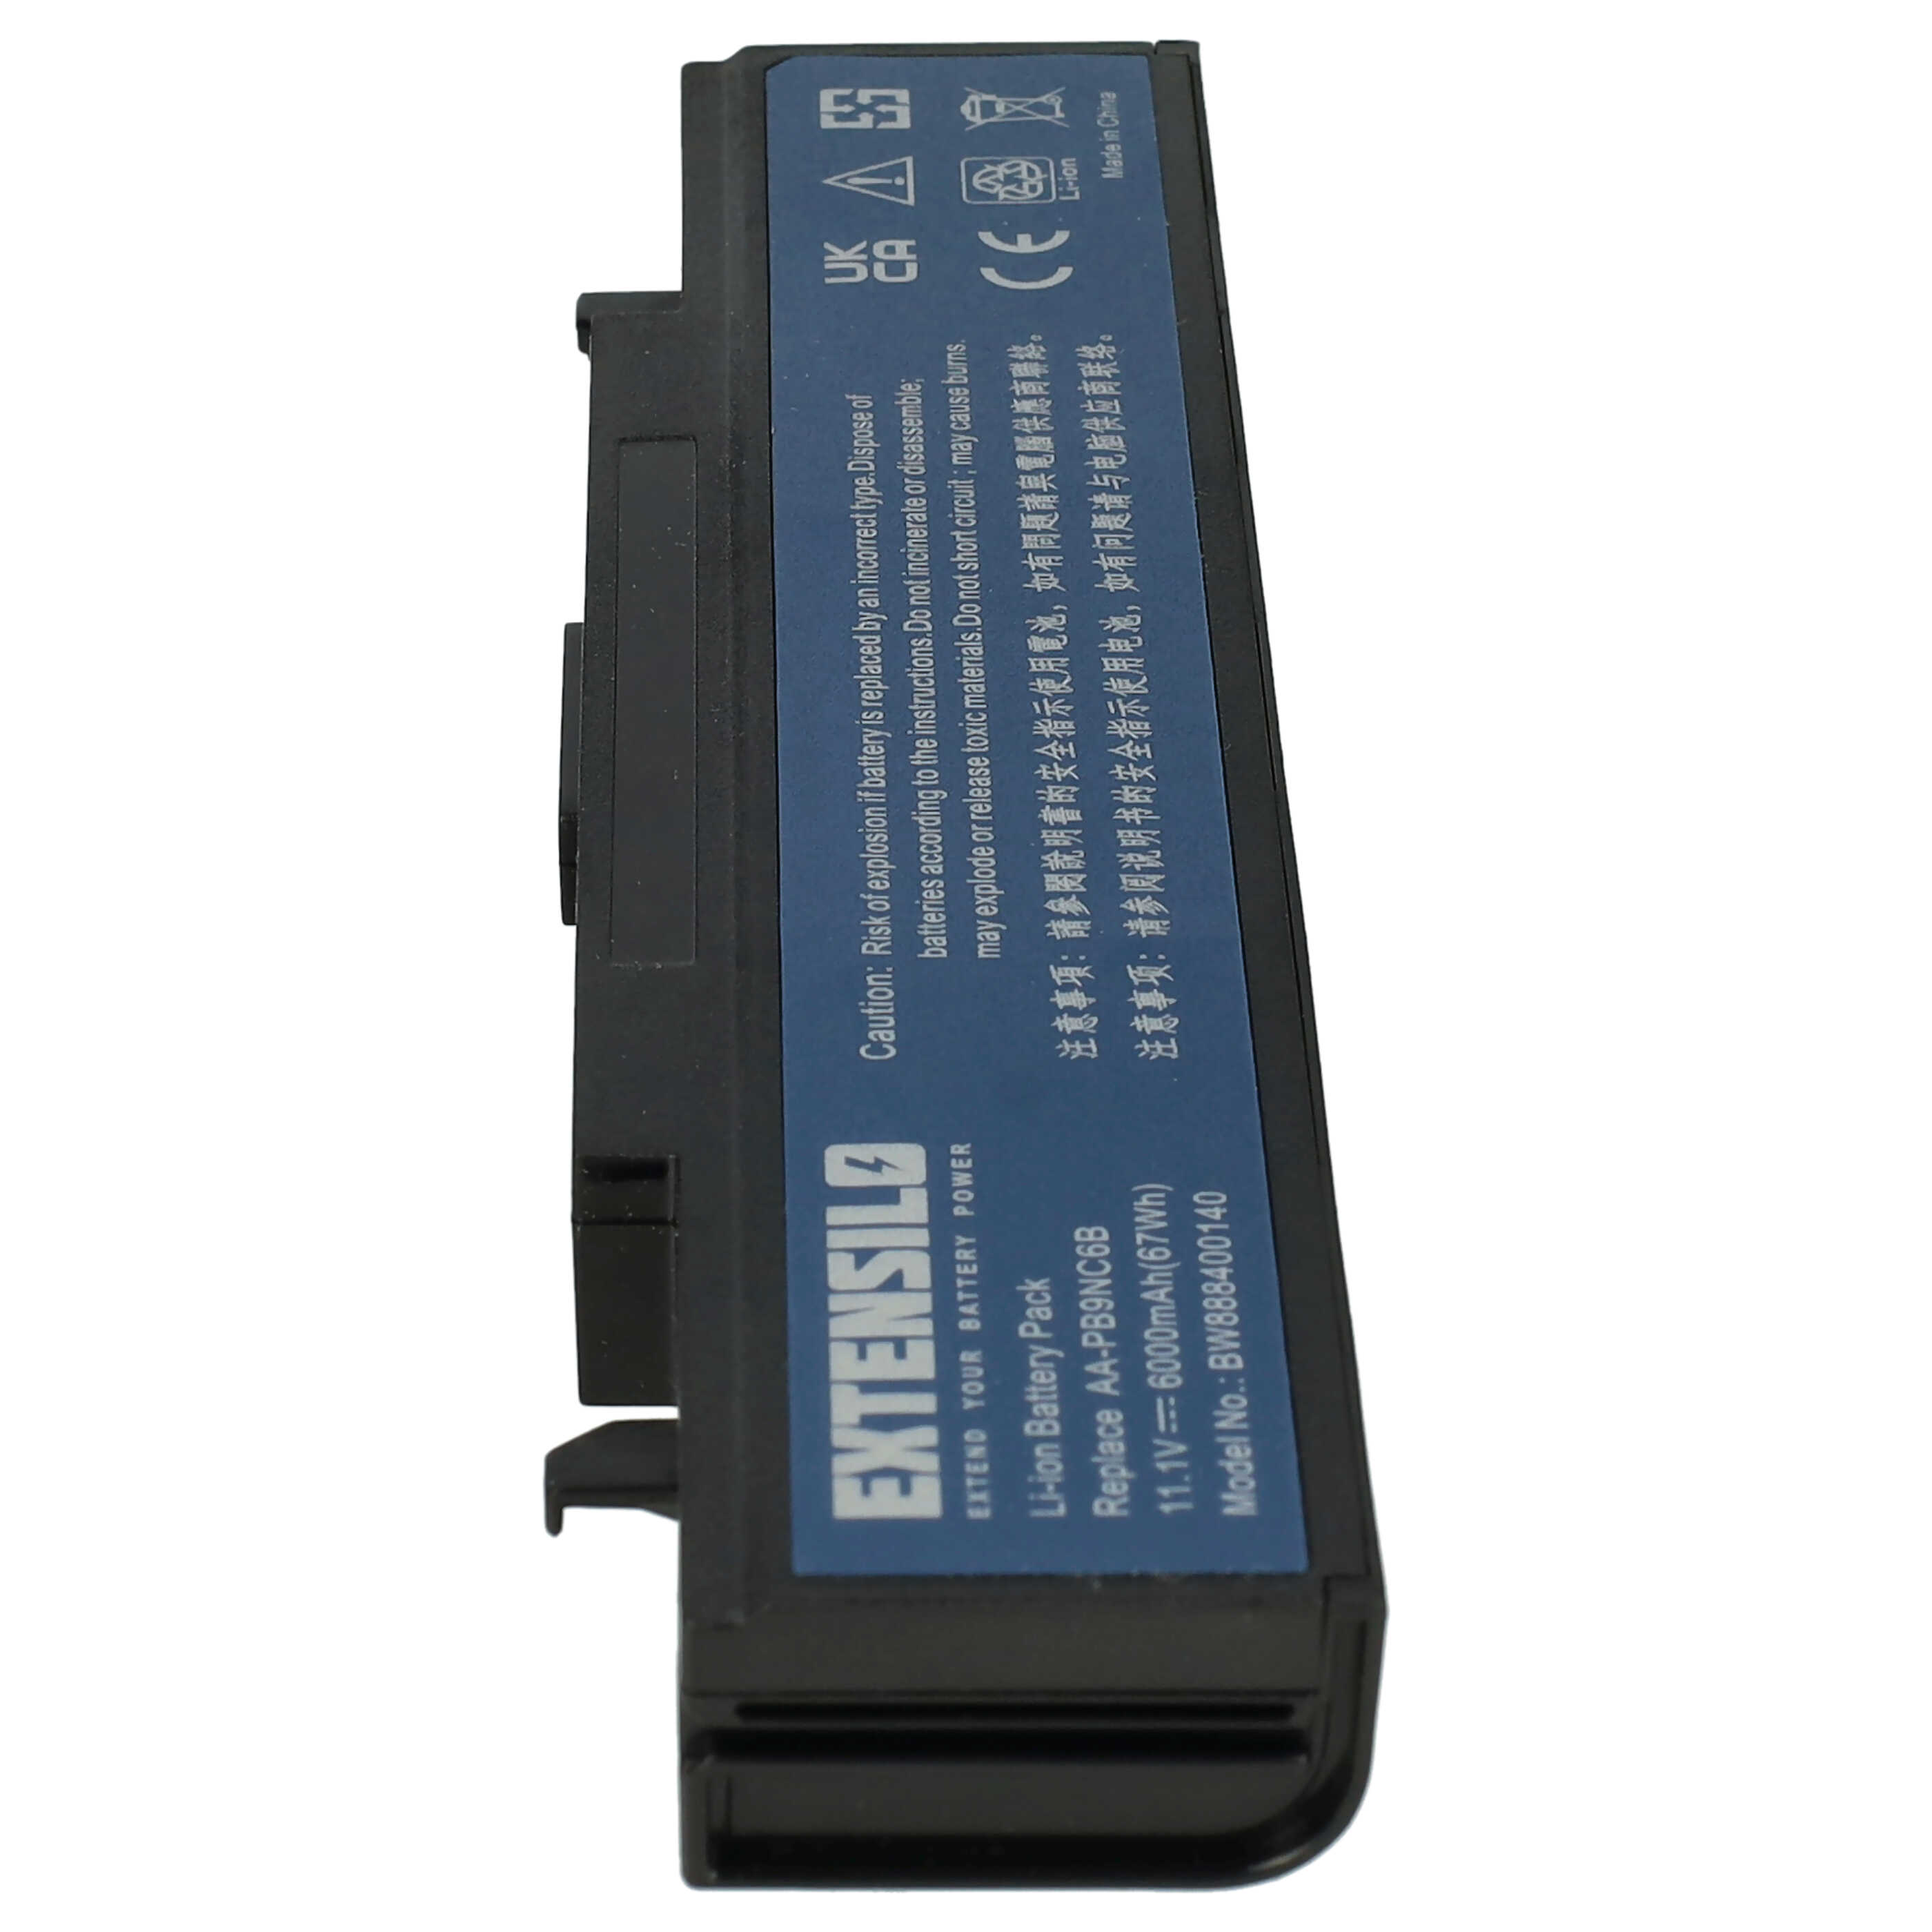 Notebook Battery Replacement for Samsung AA-PB9NC5B, AA-PB9MC6B, AA-PB9MC6W, AA-PB9MC6S - 6000mAh 11.1V Li-Ion